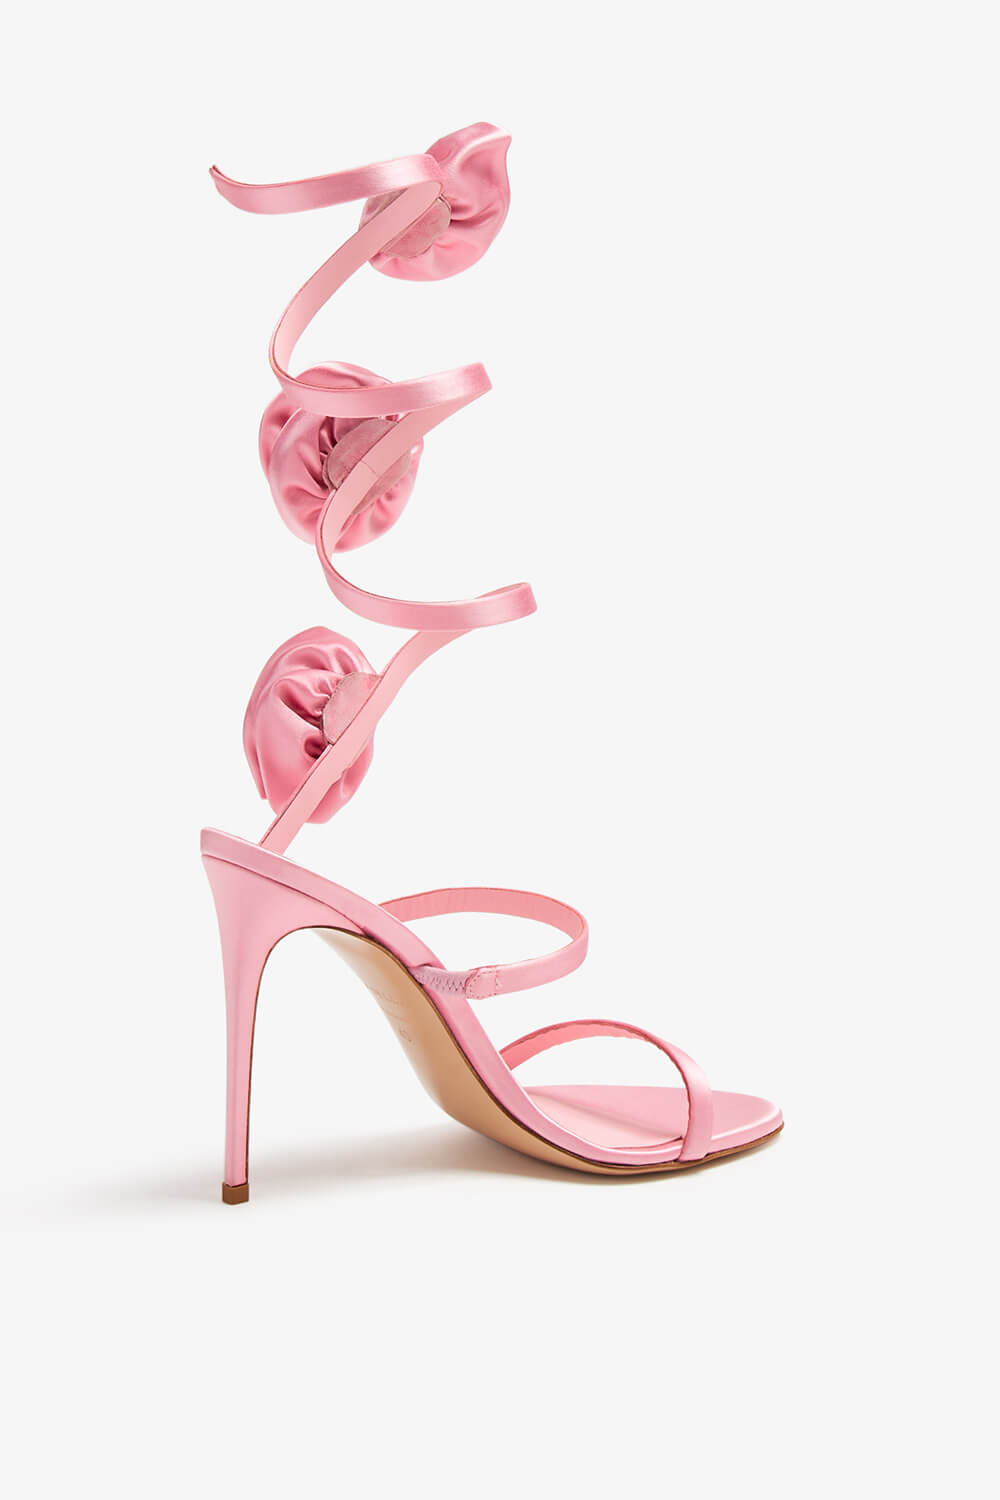 Pink Satin Wrap-Around High-Heel Sandals With Roses Detailing